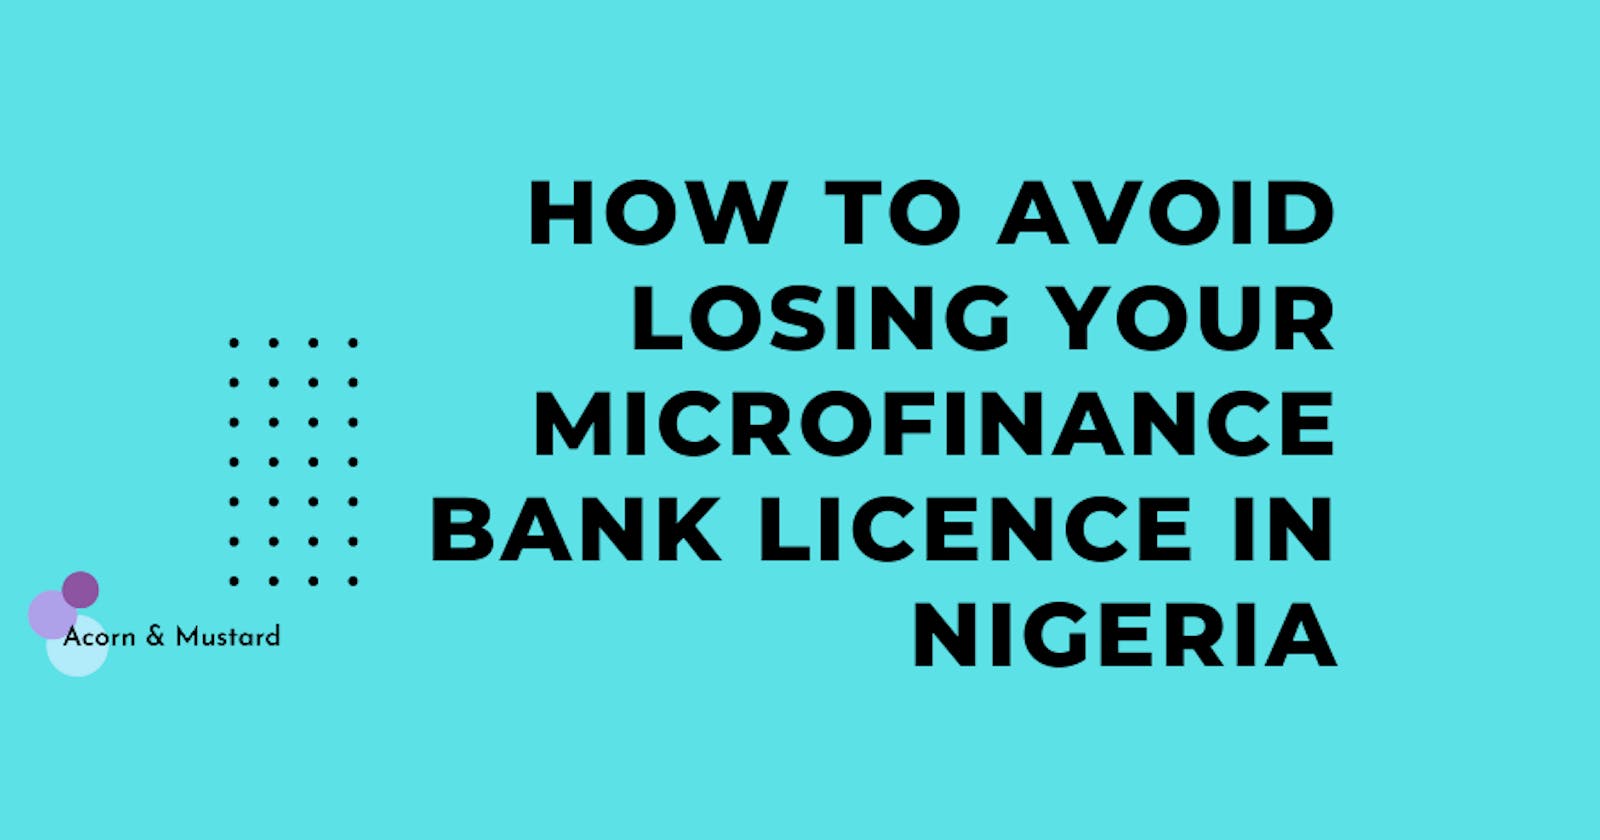 How to Avoid Losing Your Microfinance (Digital) Bank Licence in Nigeria